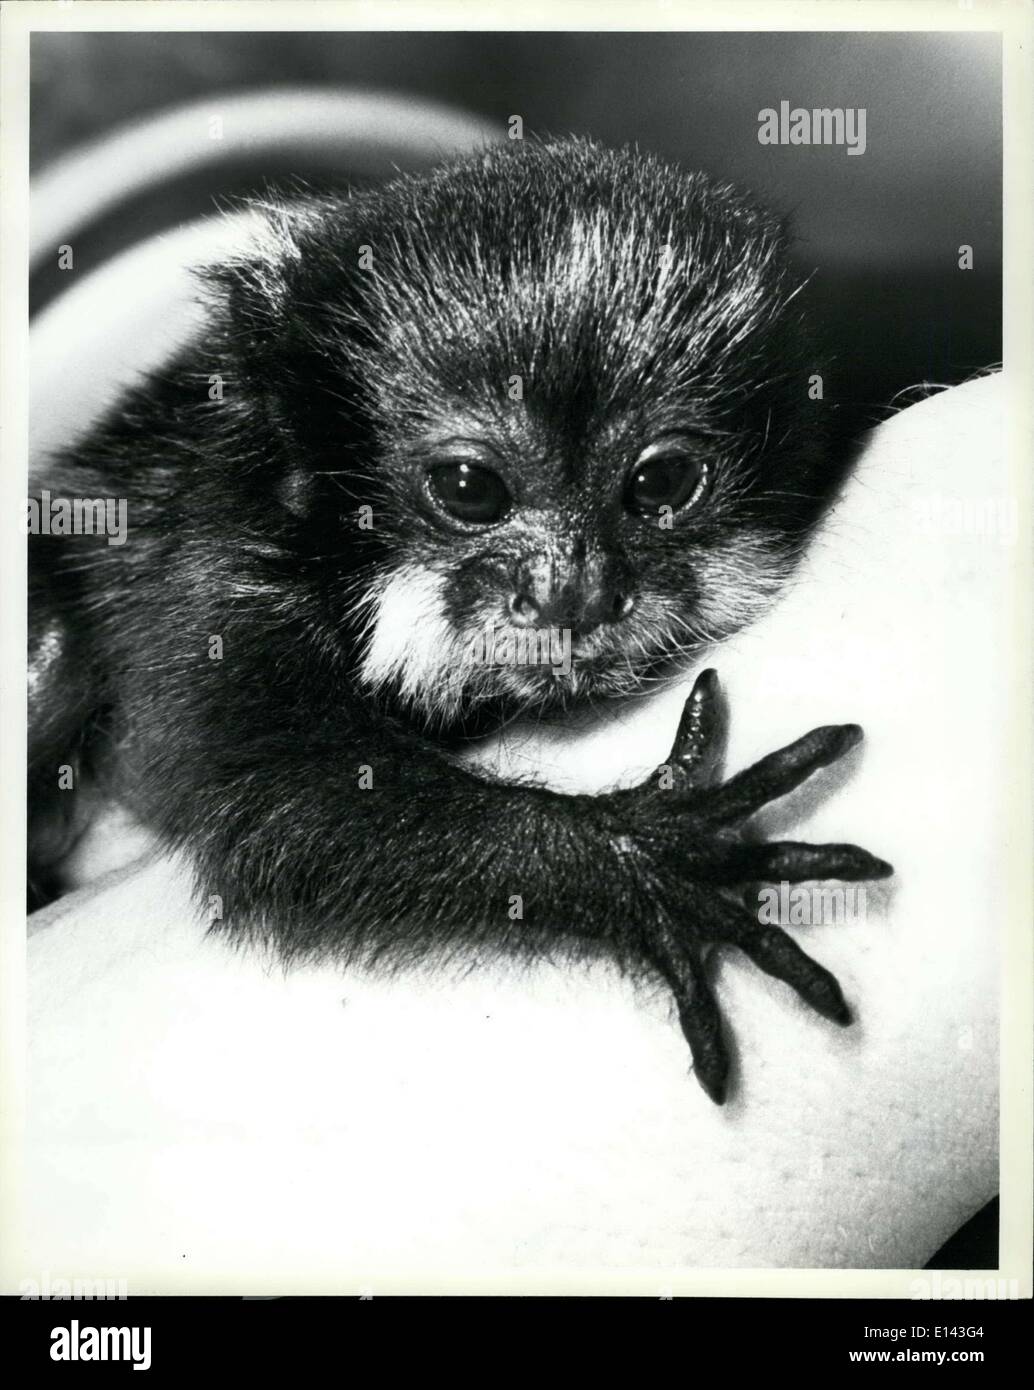 Mar. 31, 2012 - TINY TAMARIN: A thumb-sized white-lipped tamarin, dubbed ''Davy'' by San Diego Zoo nursery supervisor Joann Thomas, is being raised by humans in the intensive care section of the newly remodeled Starkey Primate Nursery because his mother failed to care for him properly. The month-old member of the marmoset family is bottle fed and lives in an incubator where he clings to a clean paint roller instead of clinging to mother's fur. Davy can be seen by visitors to the Children's Zoo, which contains the Starkey Primate Nursery Stock Photo